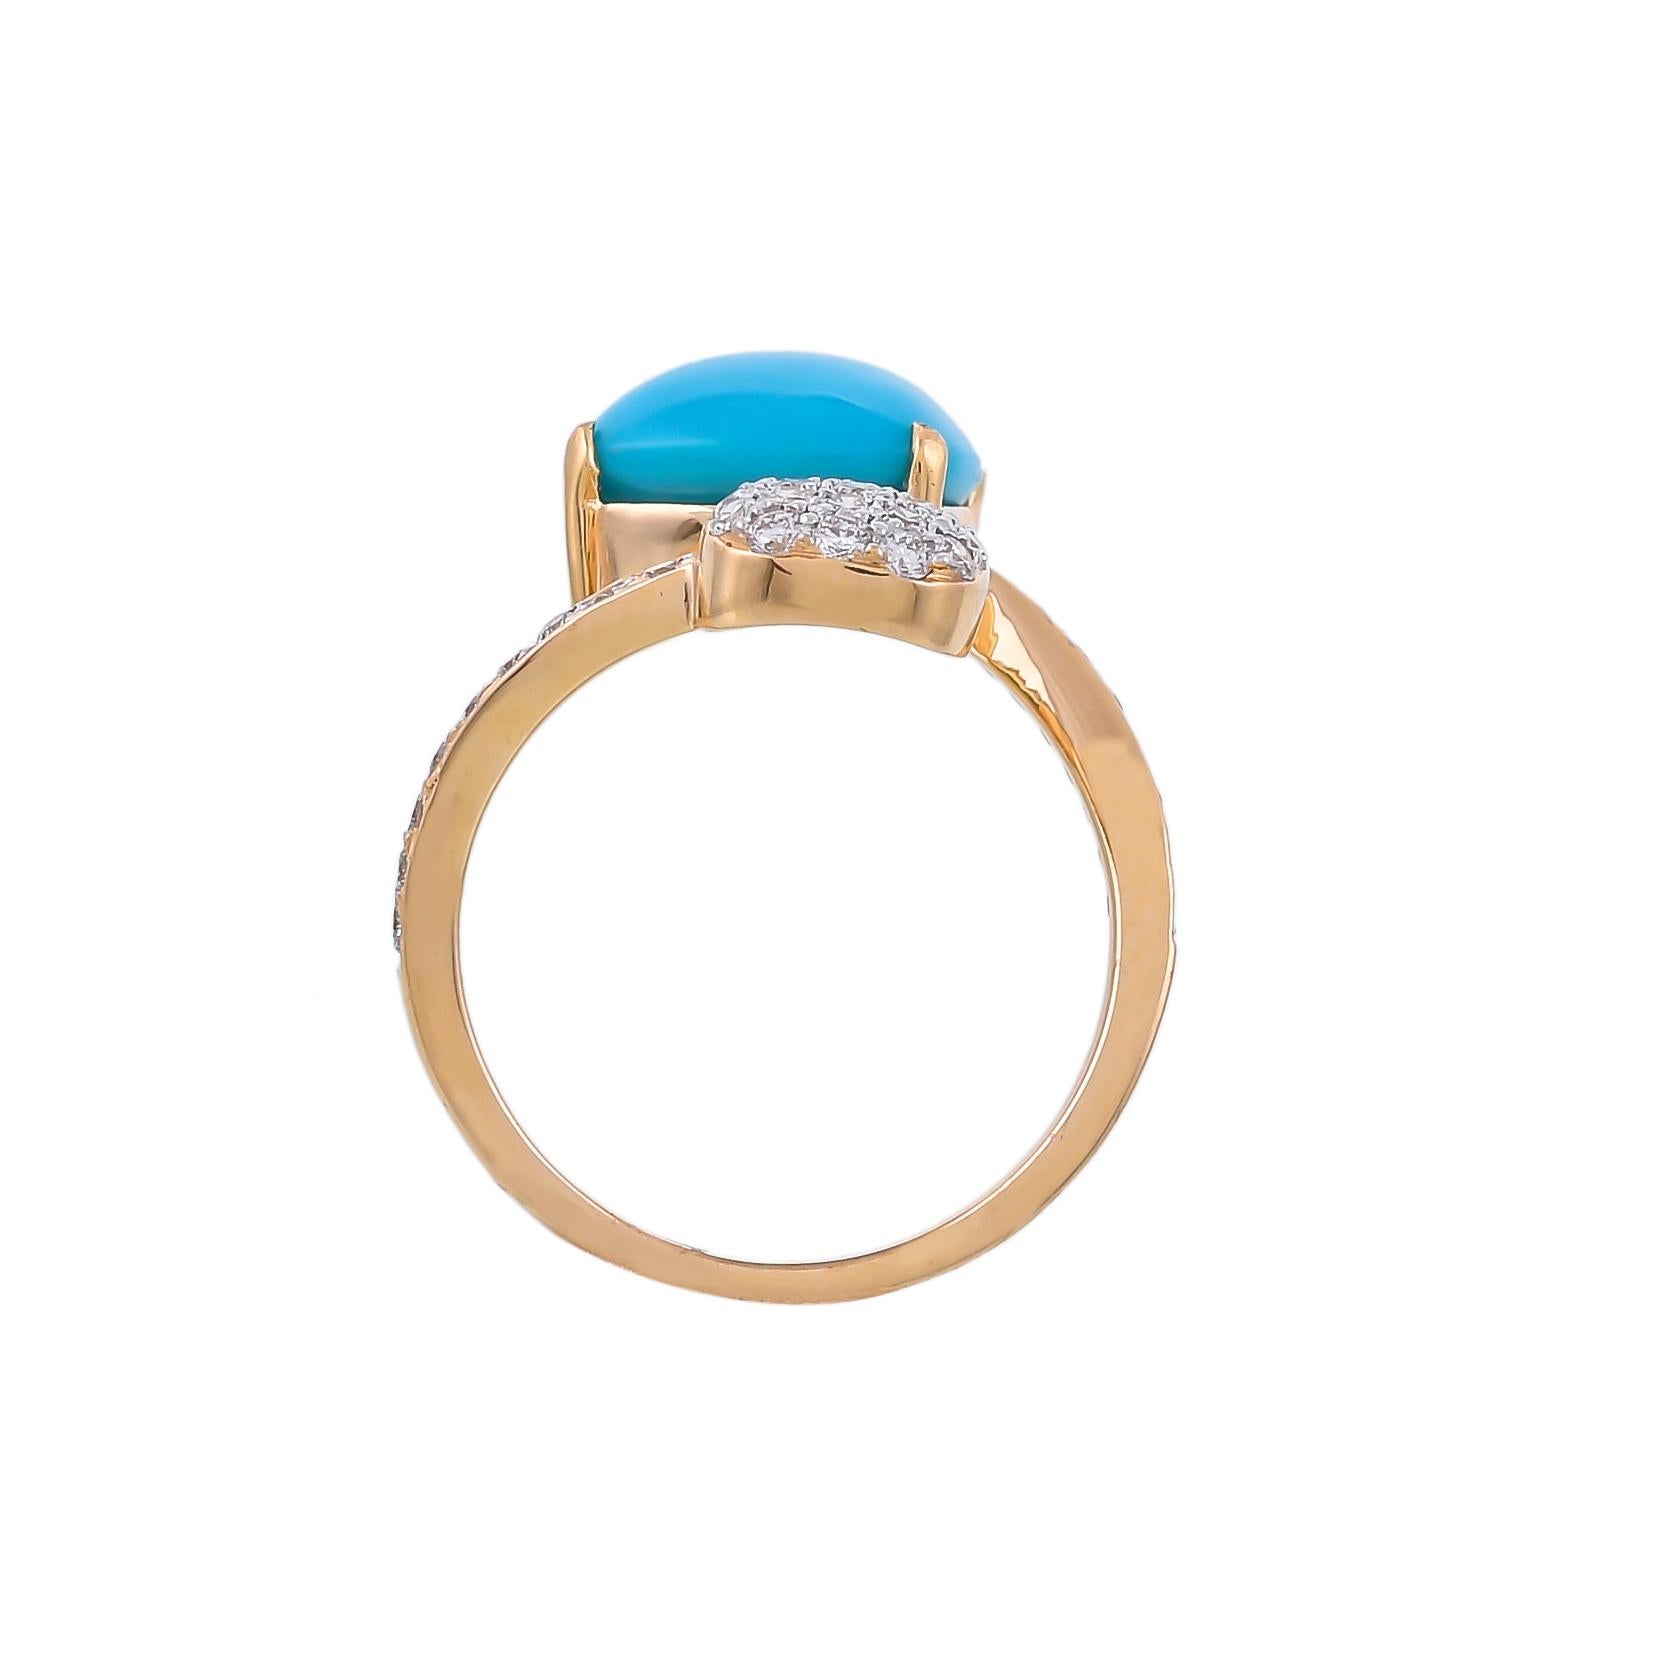 Add a classy touch of elegance to your looks with this simple yet understated ring. Handcrafted in 18 karats yellow gold, this ring features 5.22 carats cushion-shaped turquoise and 0.49 carats pave set sparkling white diamonds.
Accentuate your look